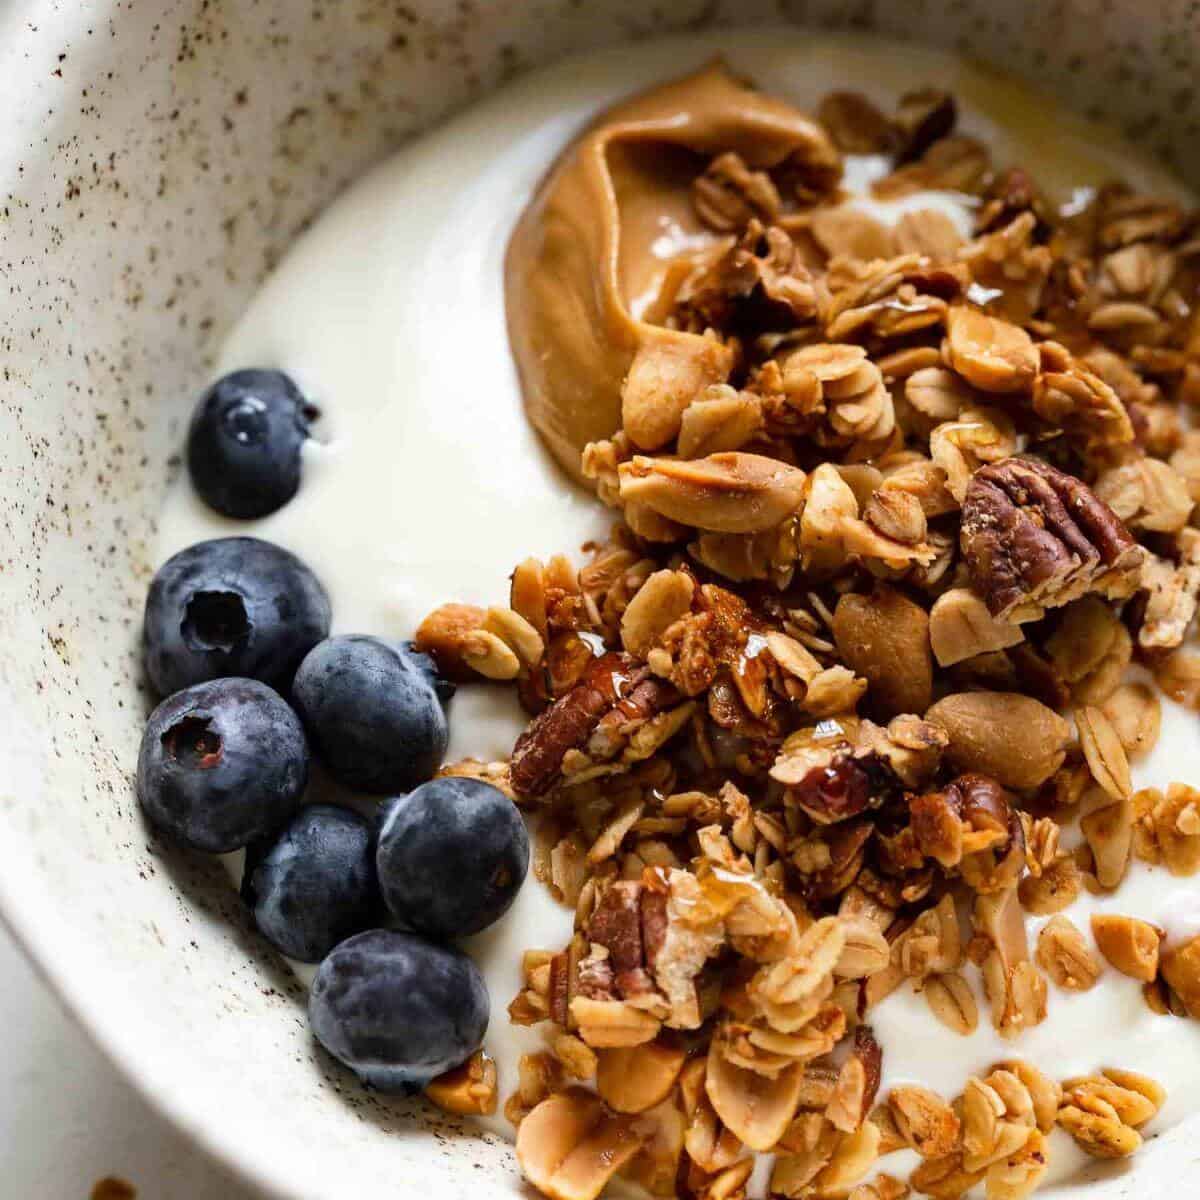 granola in a bowl with milk, peanut butter, and blueberries